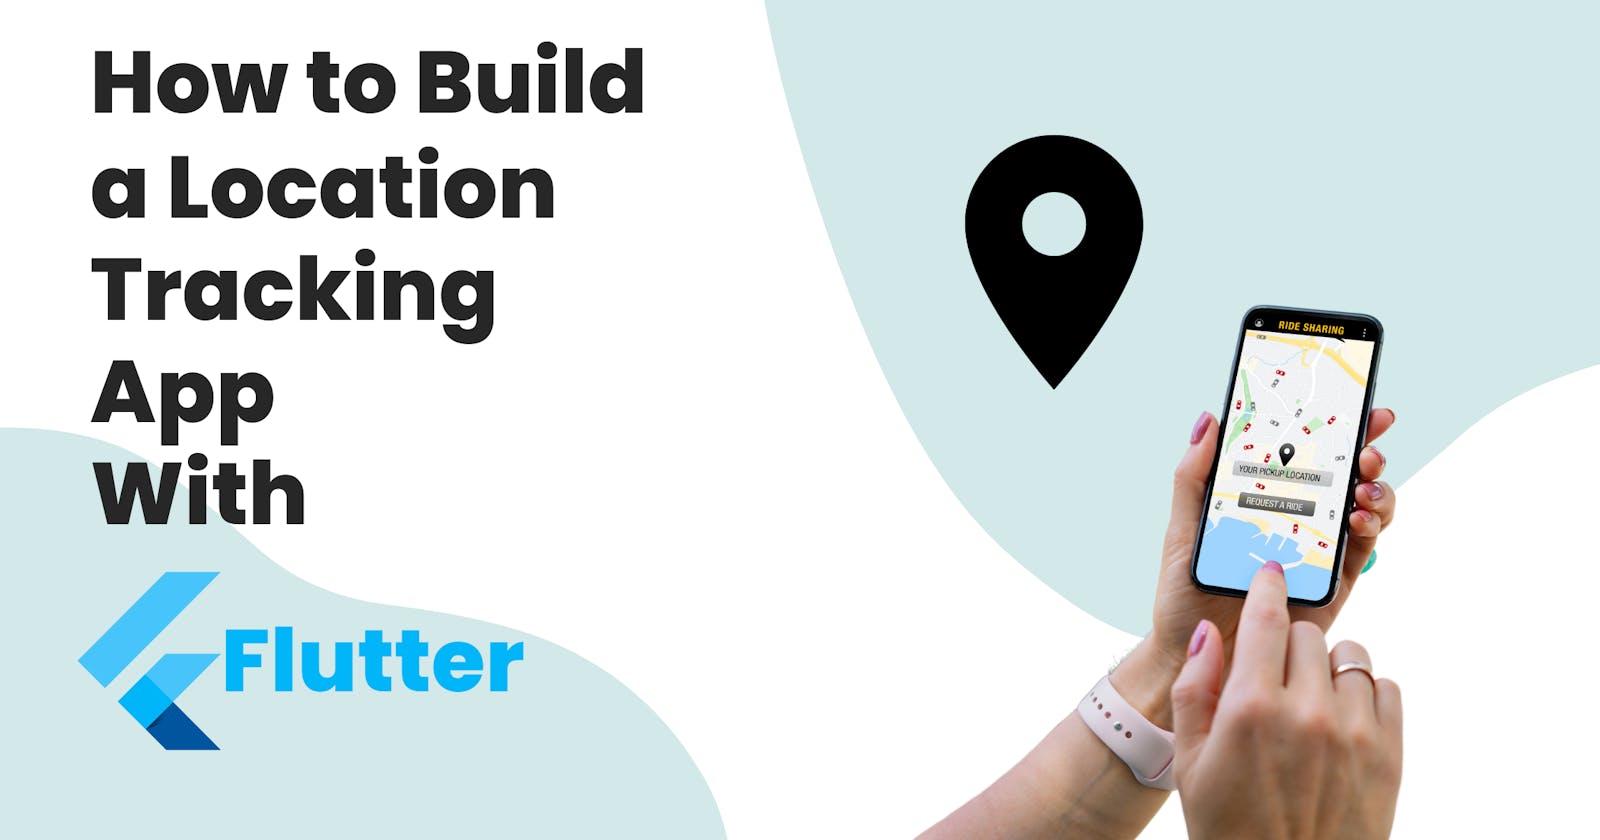 How to Build a Location Tracking App With Flutter